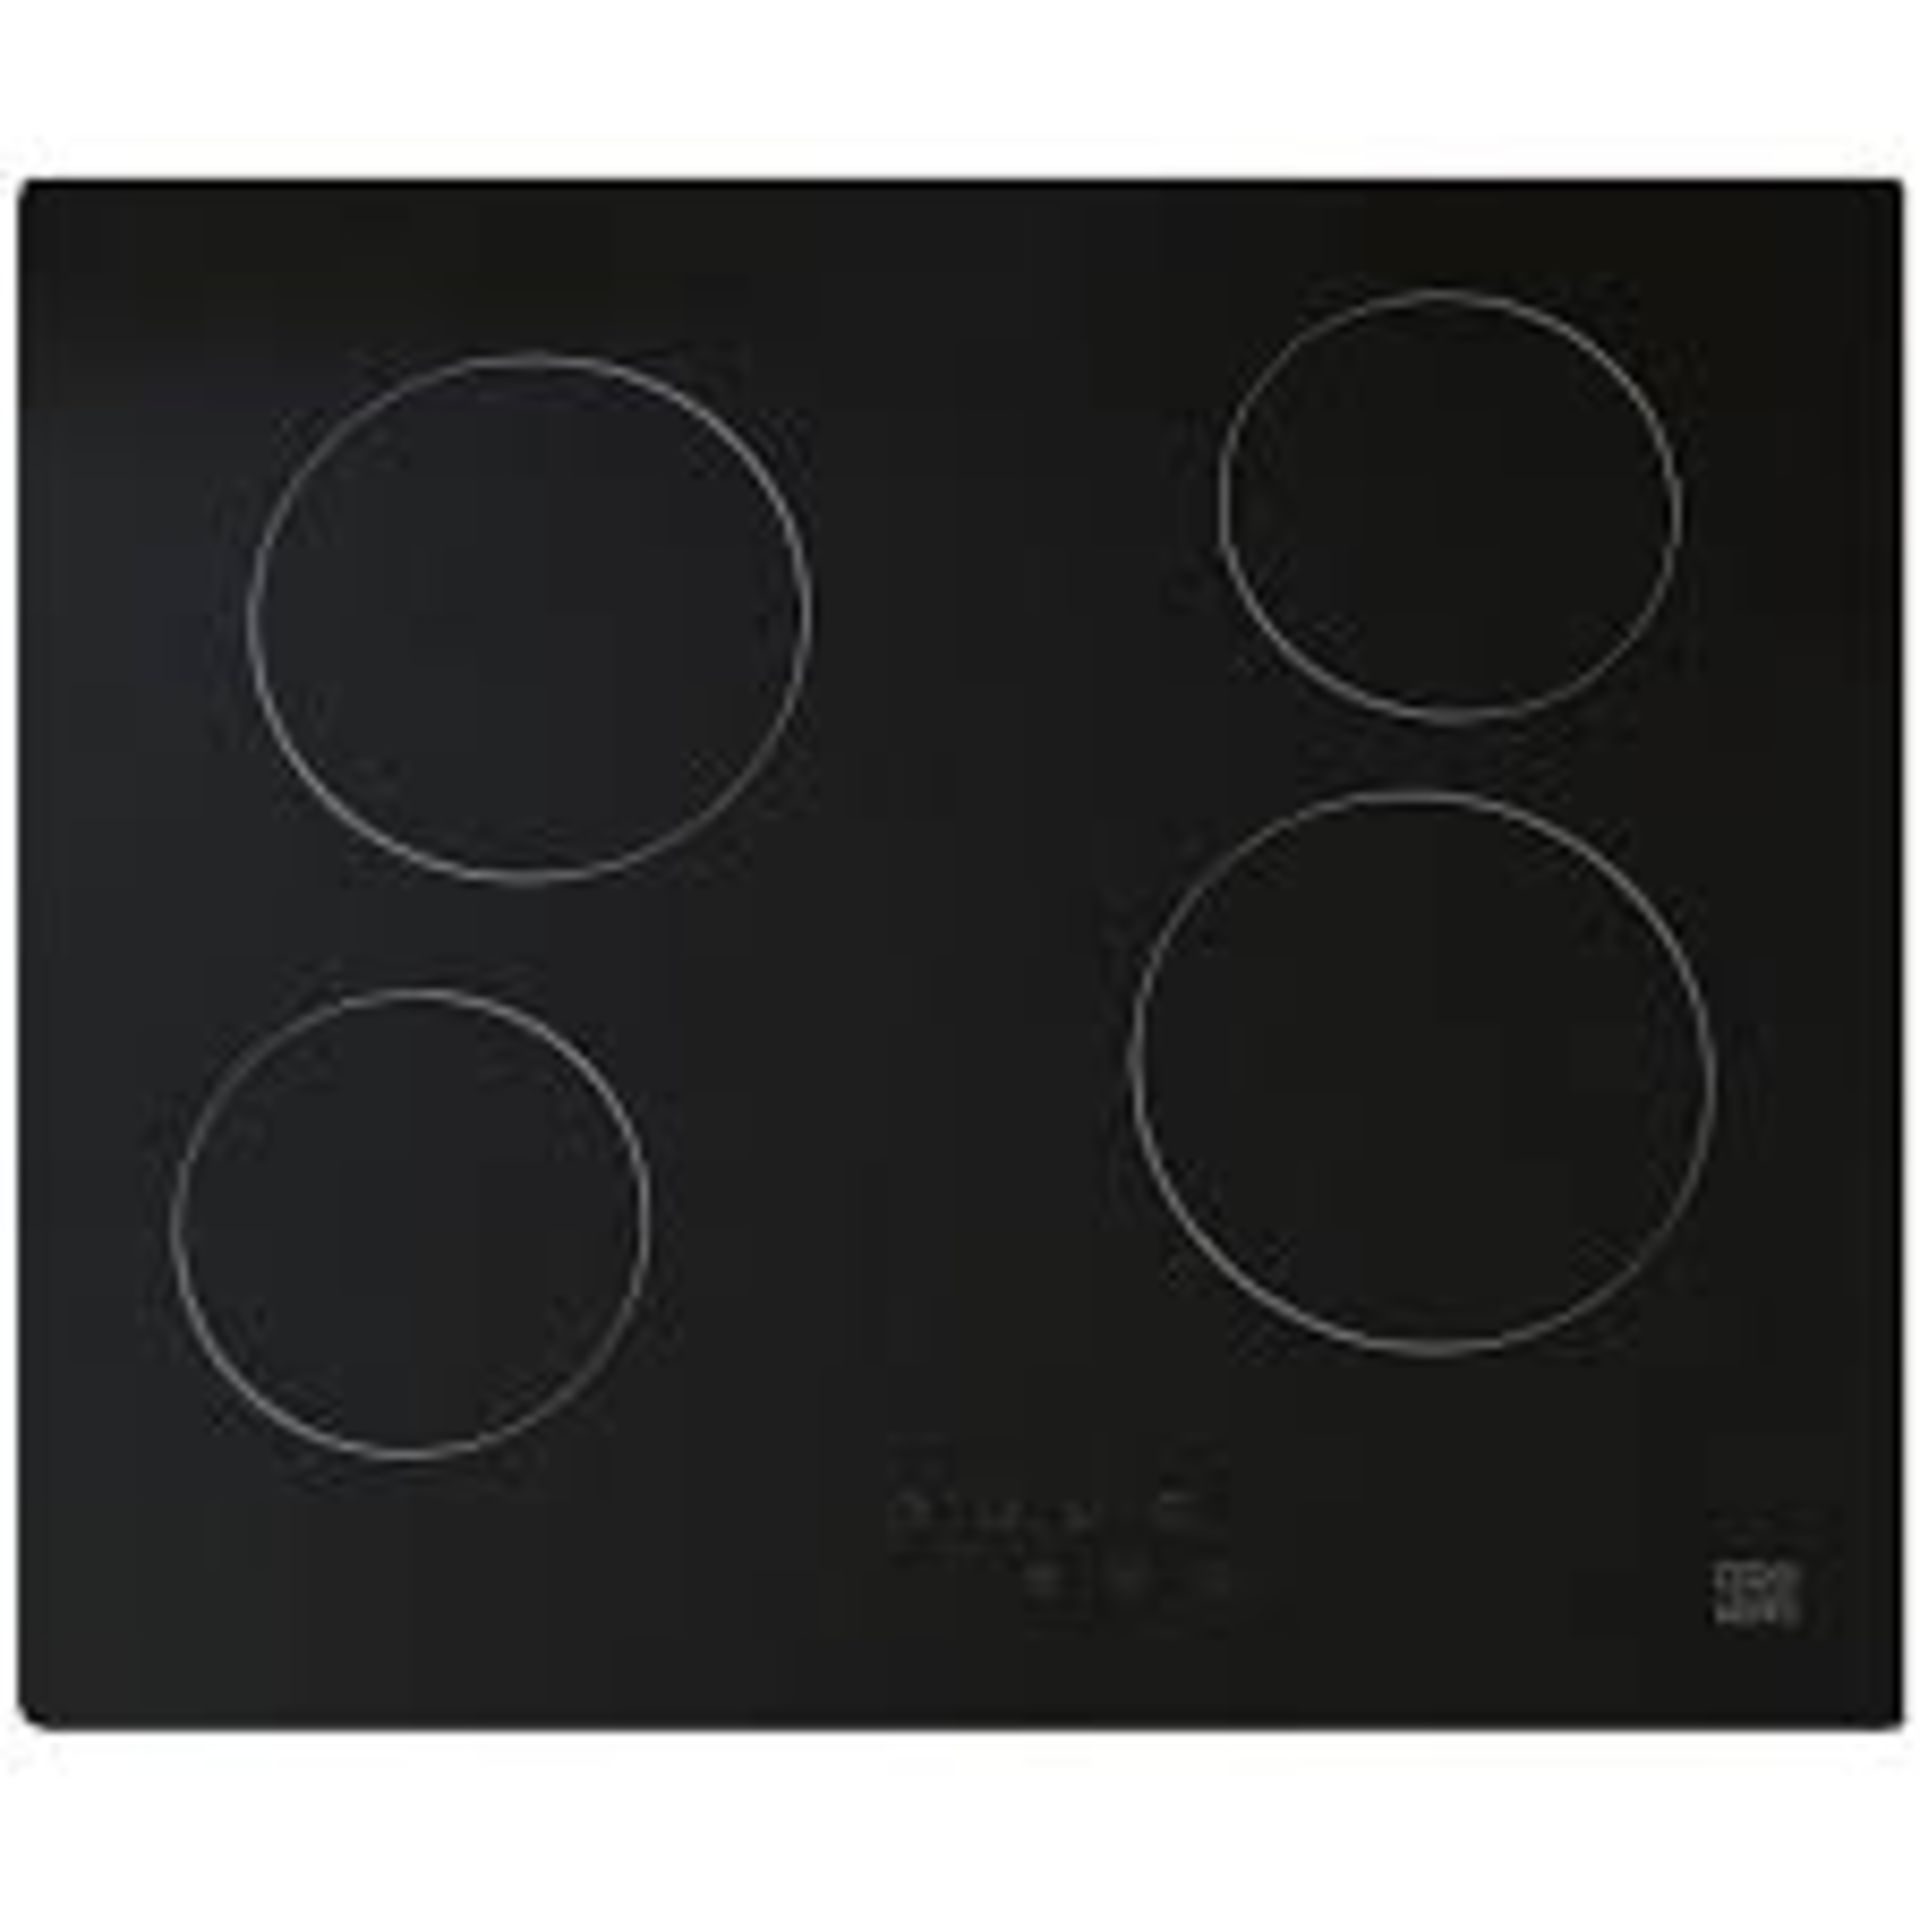 Cooke & Lewis CLCER60A 4 Zone Glass Ceramic Hob (W)590mm. - BI. RRP £199.00. This 4 zone, touch